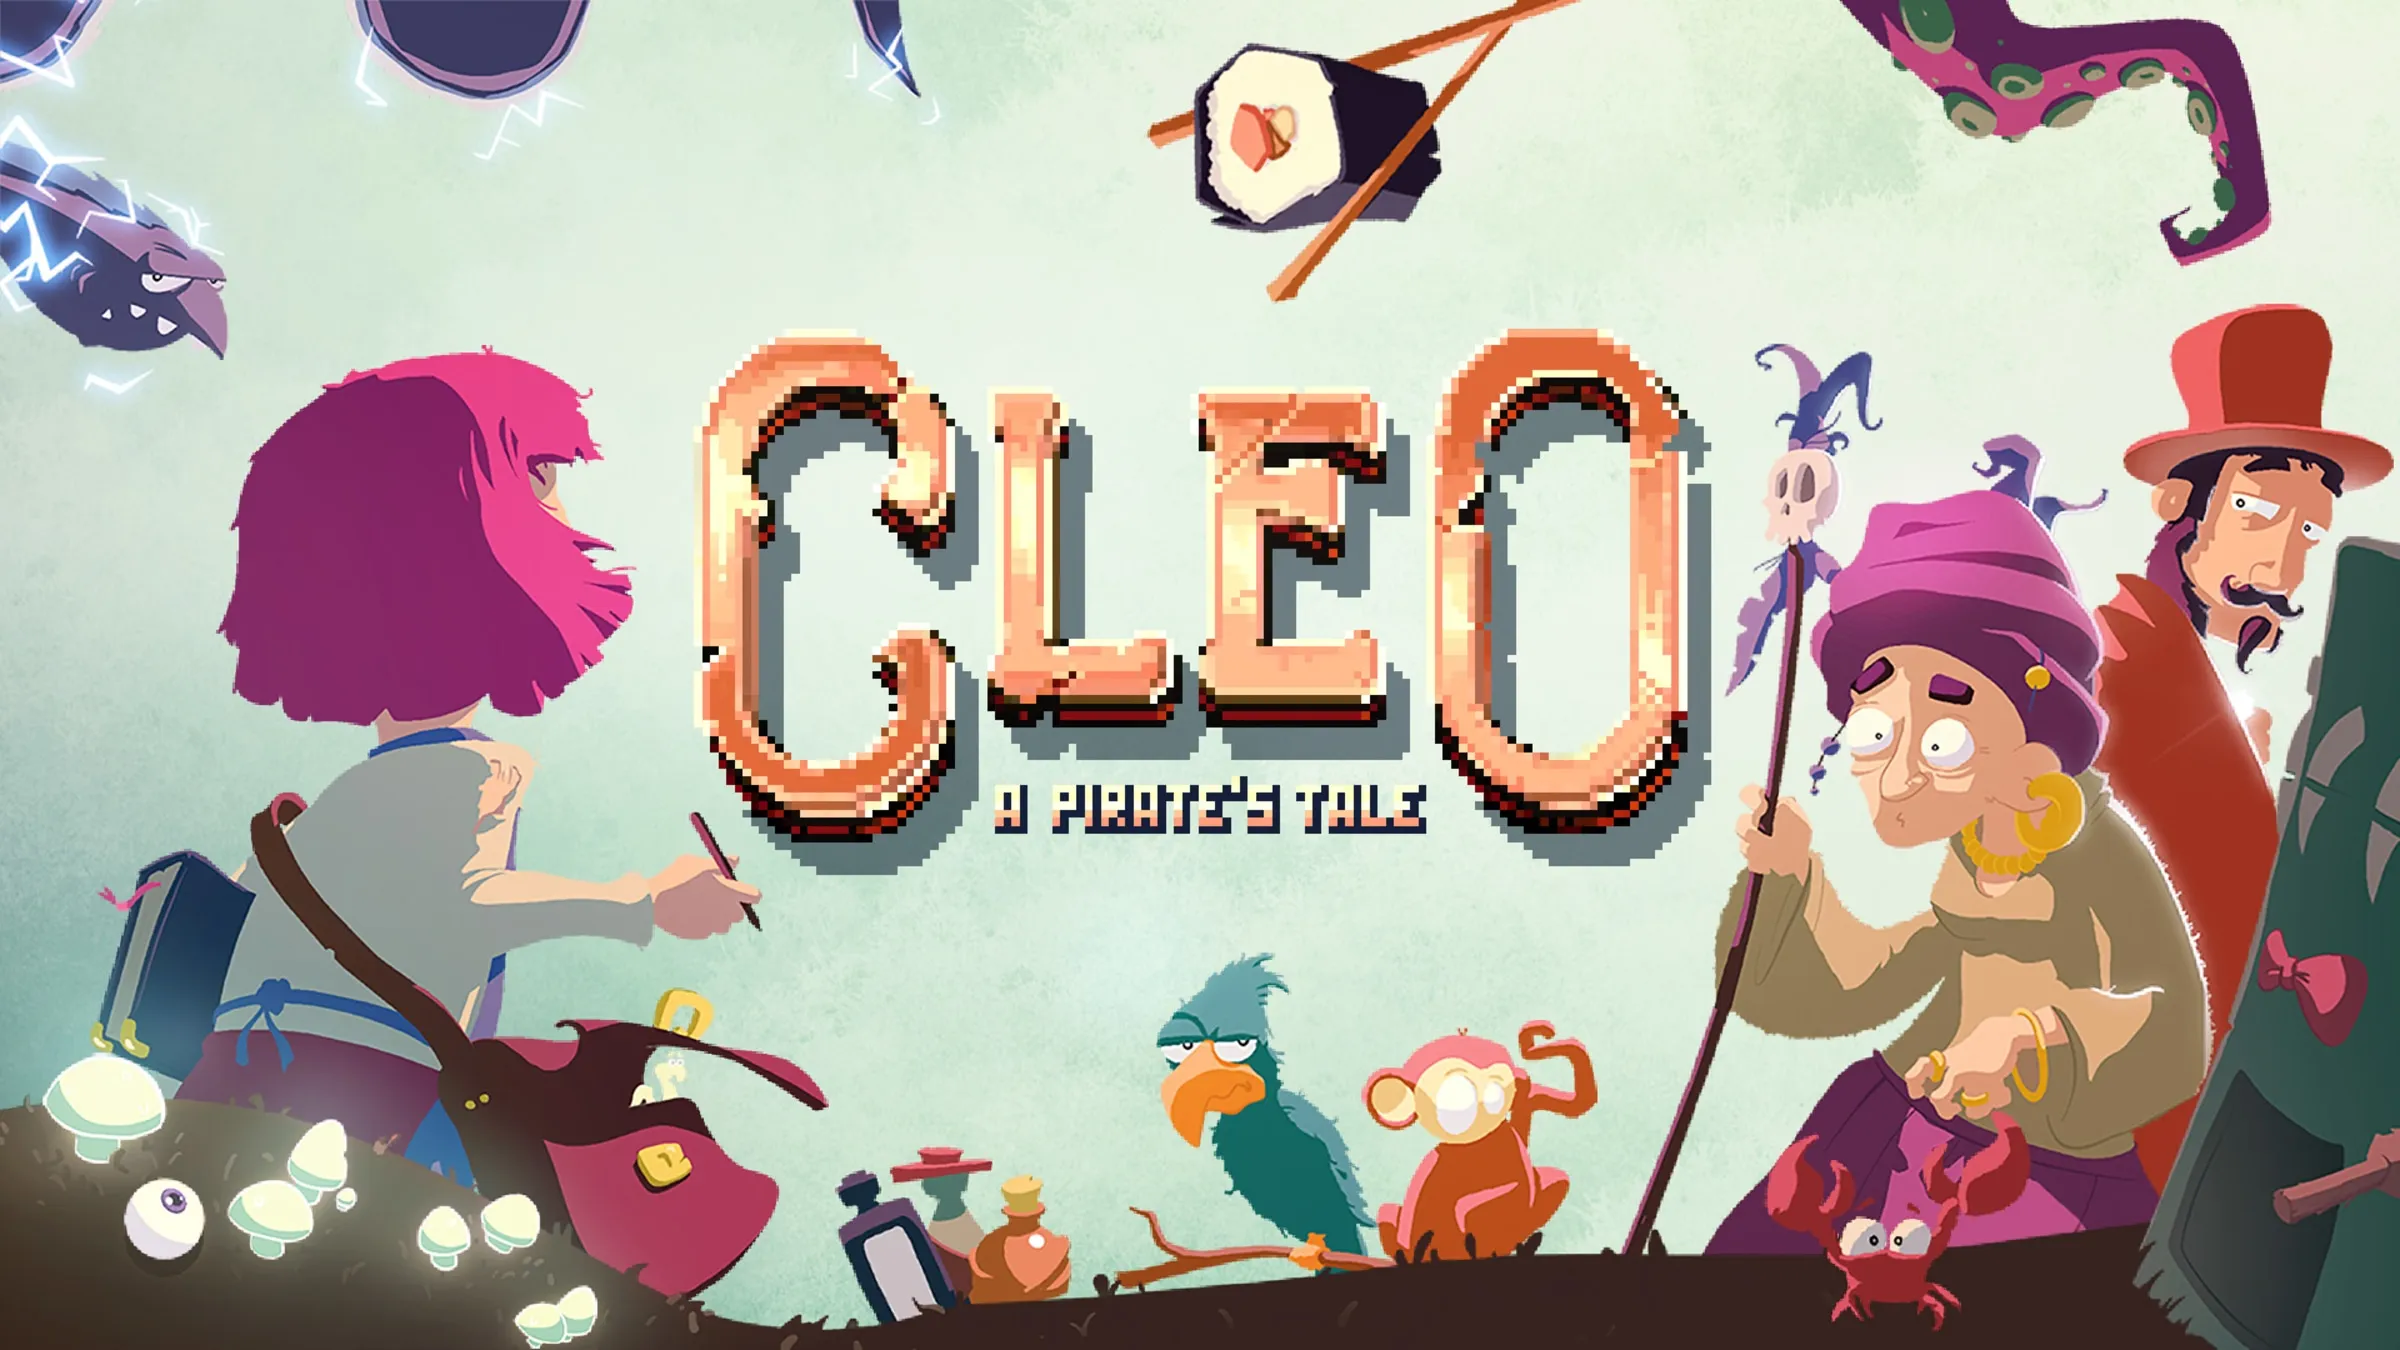 Cleo – a pirate’s tale has sold 20K copies